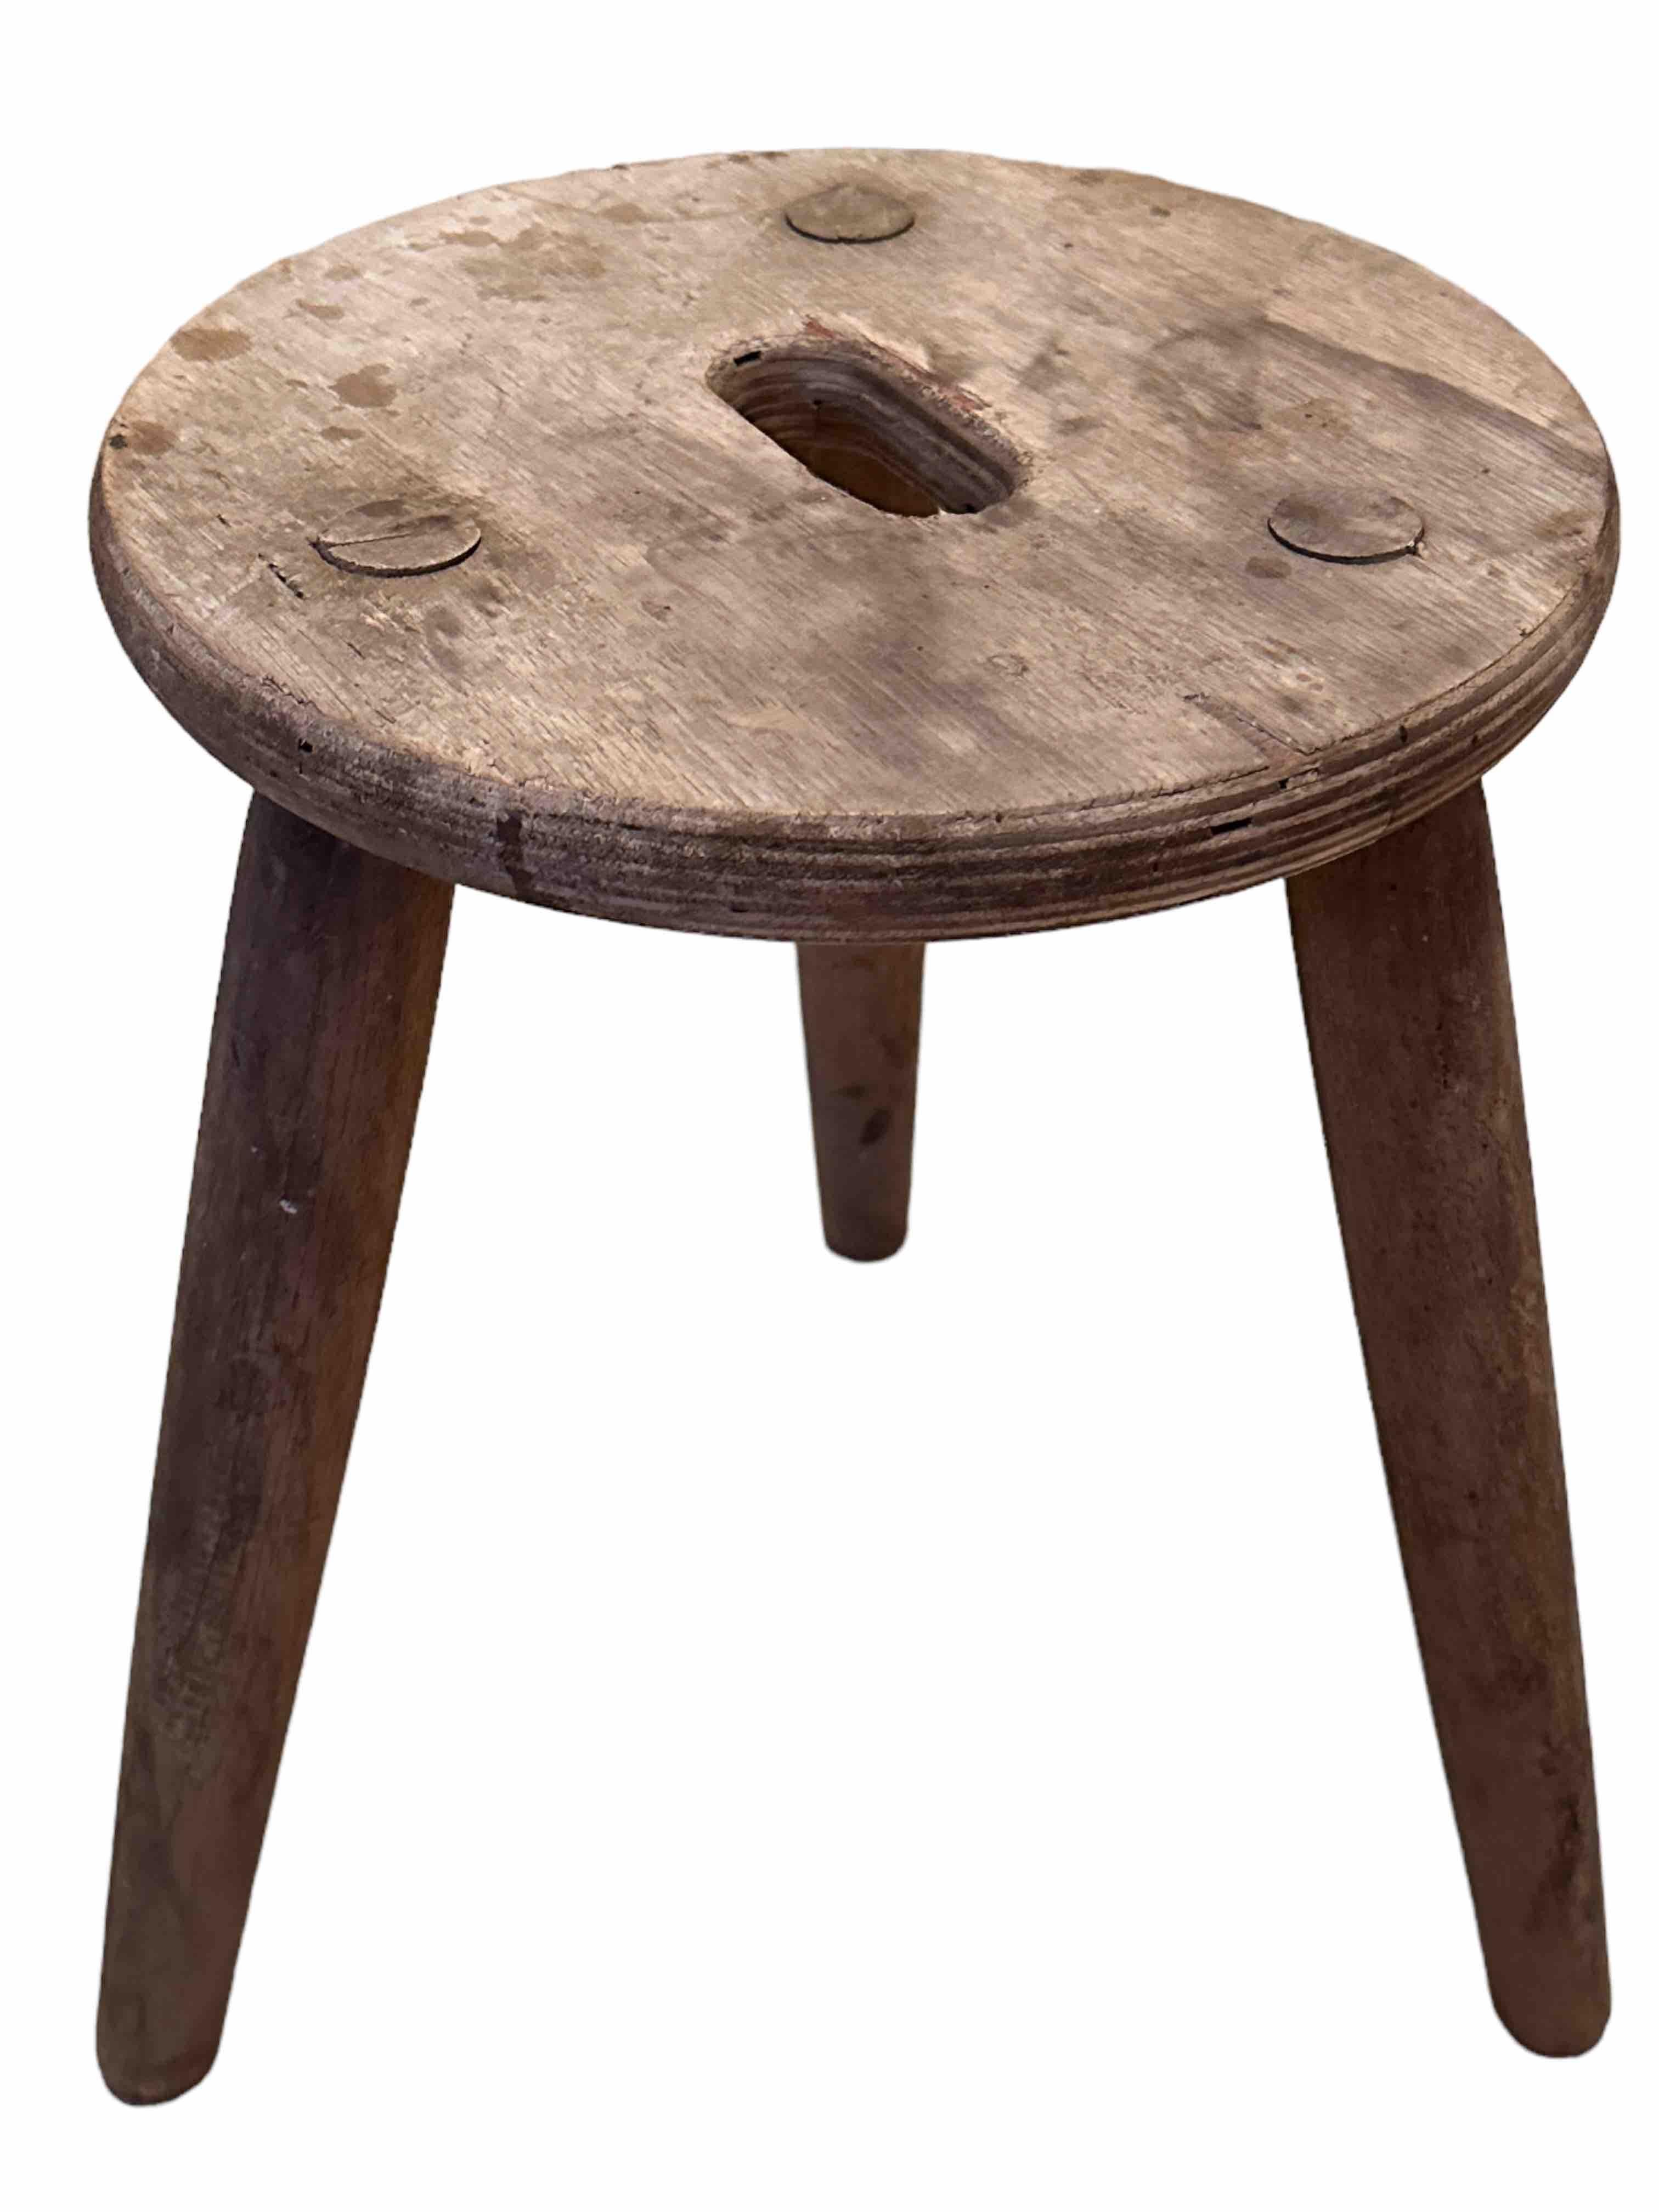 This 20th century wabi sabi 3 leg milking stool from Austria is an excellent example of this style. The piece has a round, rustic-looking seat made of wooden planks and is supported by three spindle legs. The stool has a simple, understated design